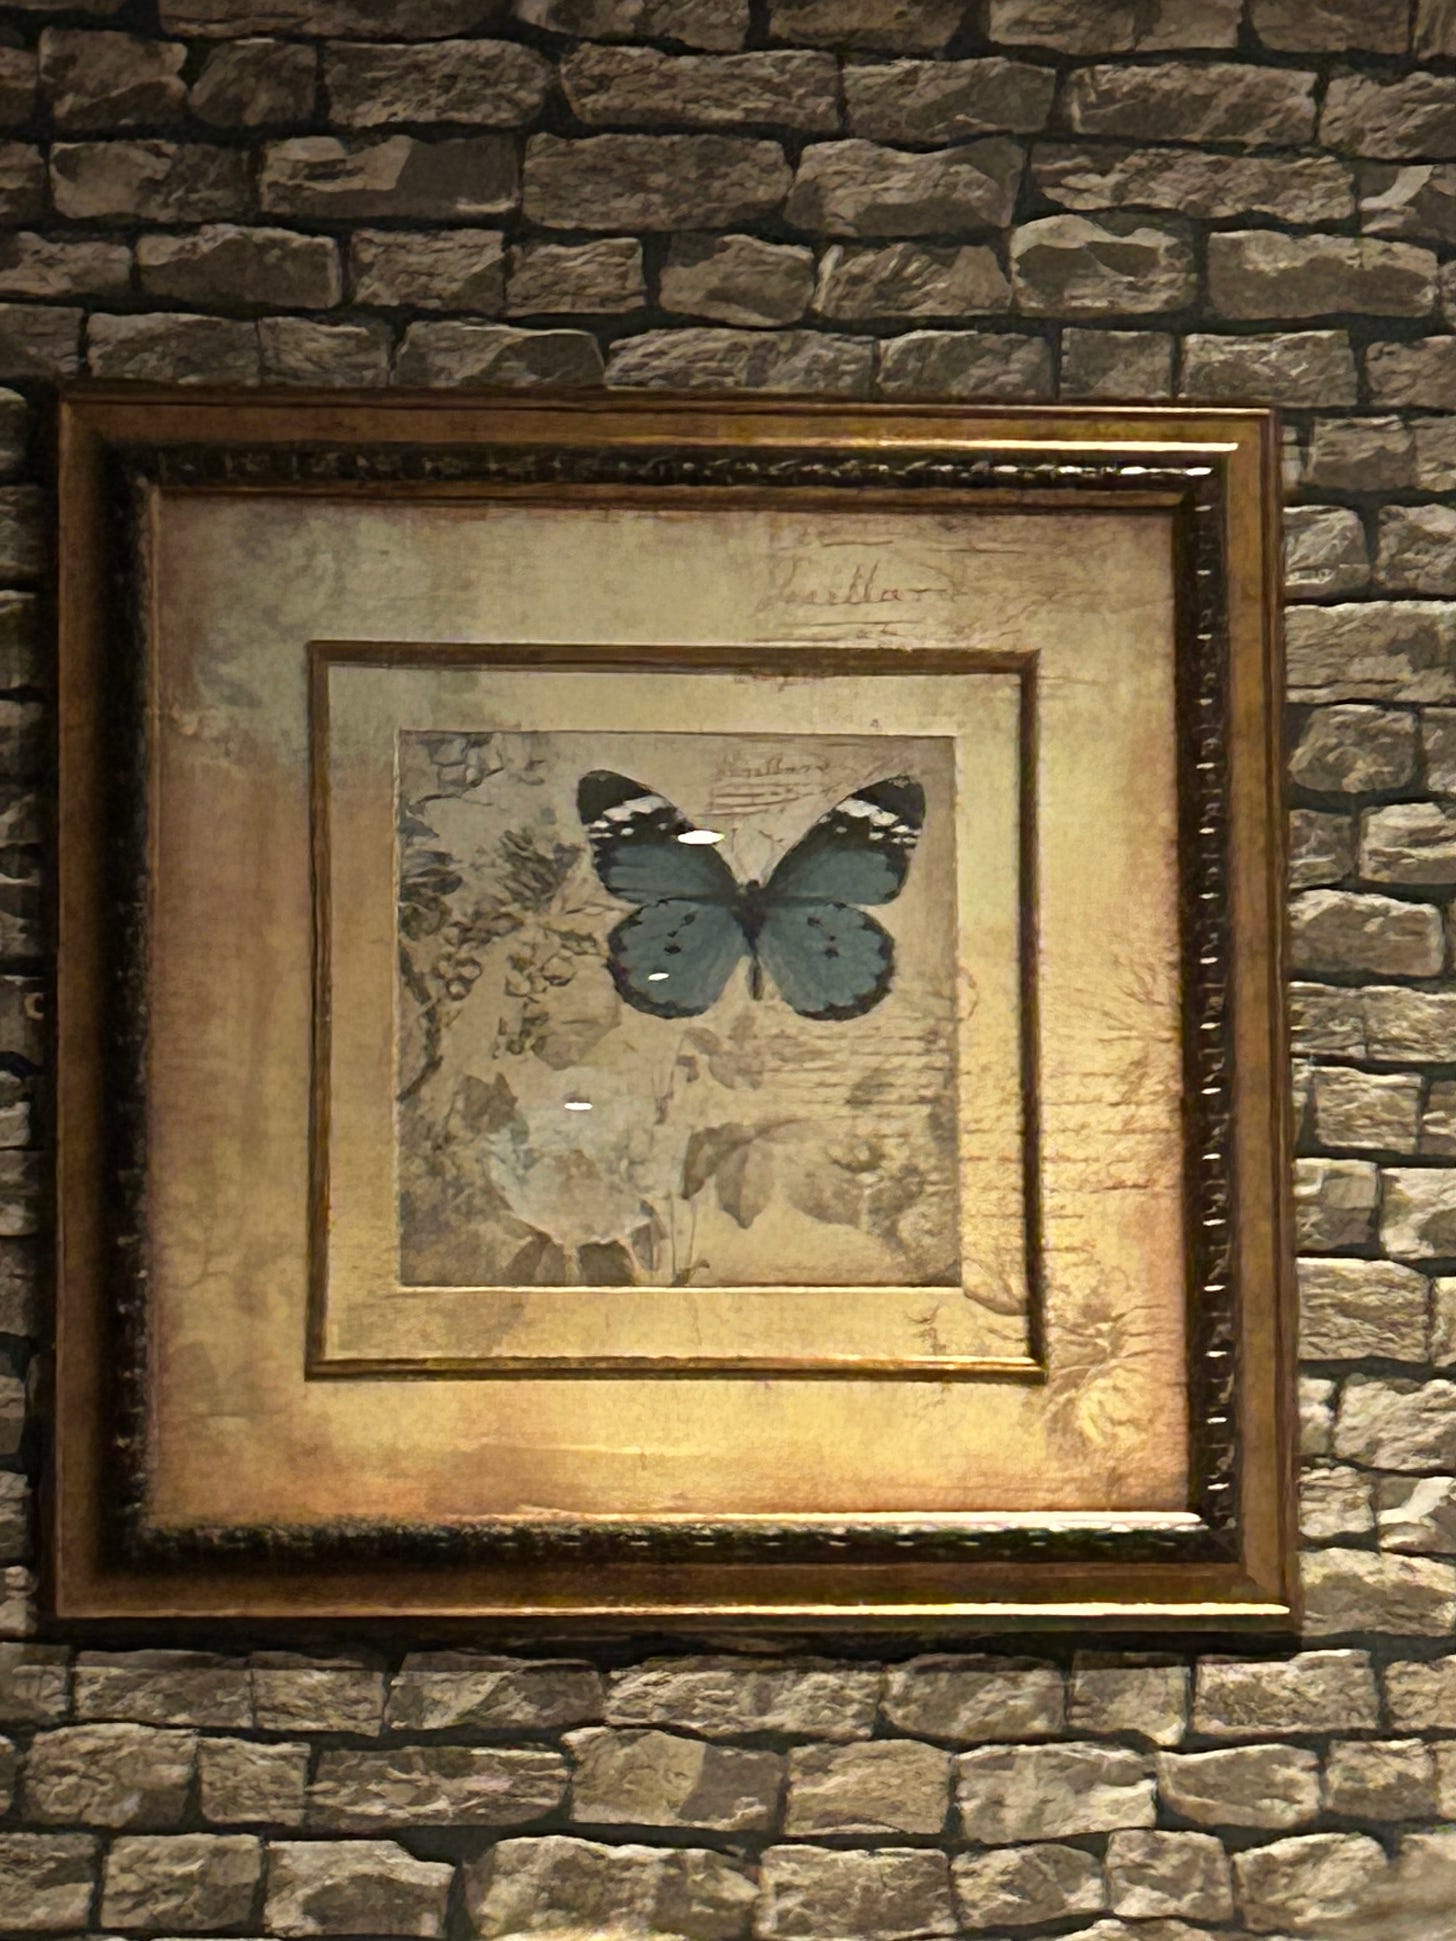 A photo of an illustrated butterfly, framed and hanging on a brick wall.